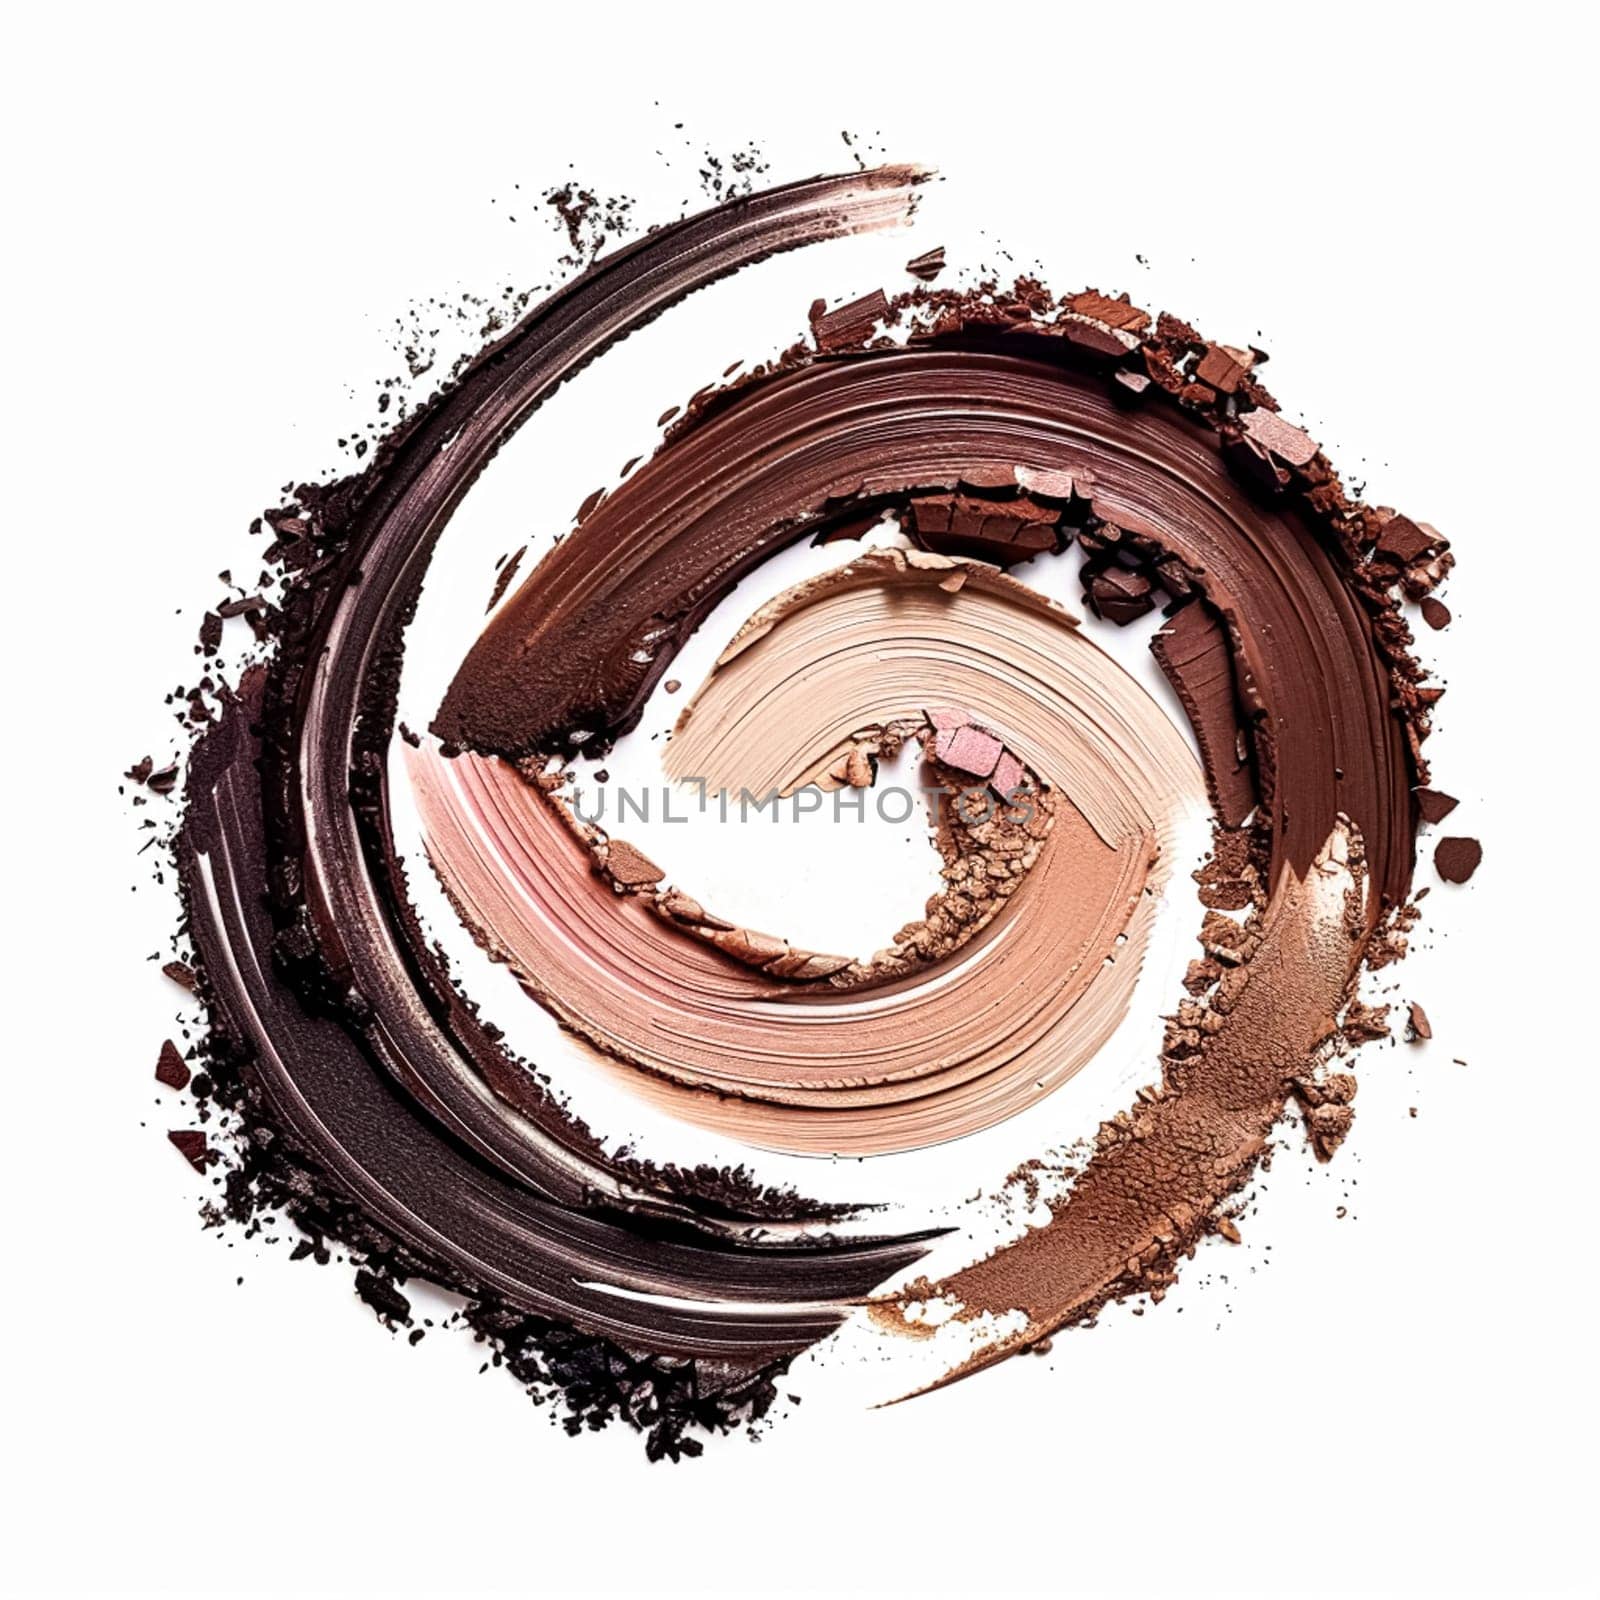 Beauty product and cosmetics texture as circle shape design, makeup blush eyeshadow powder as abstract luxury cosmetic background art